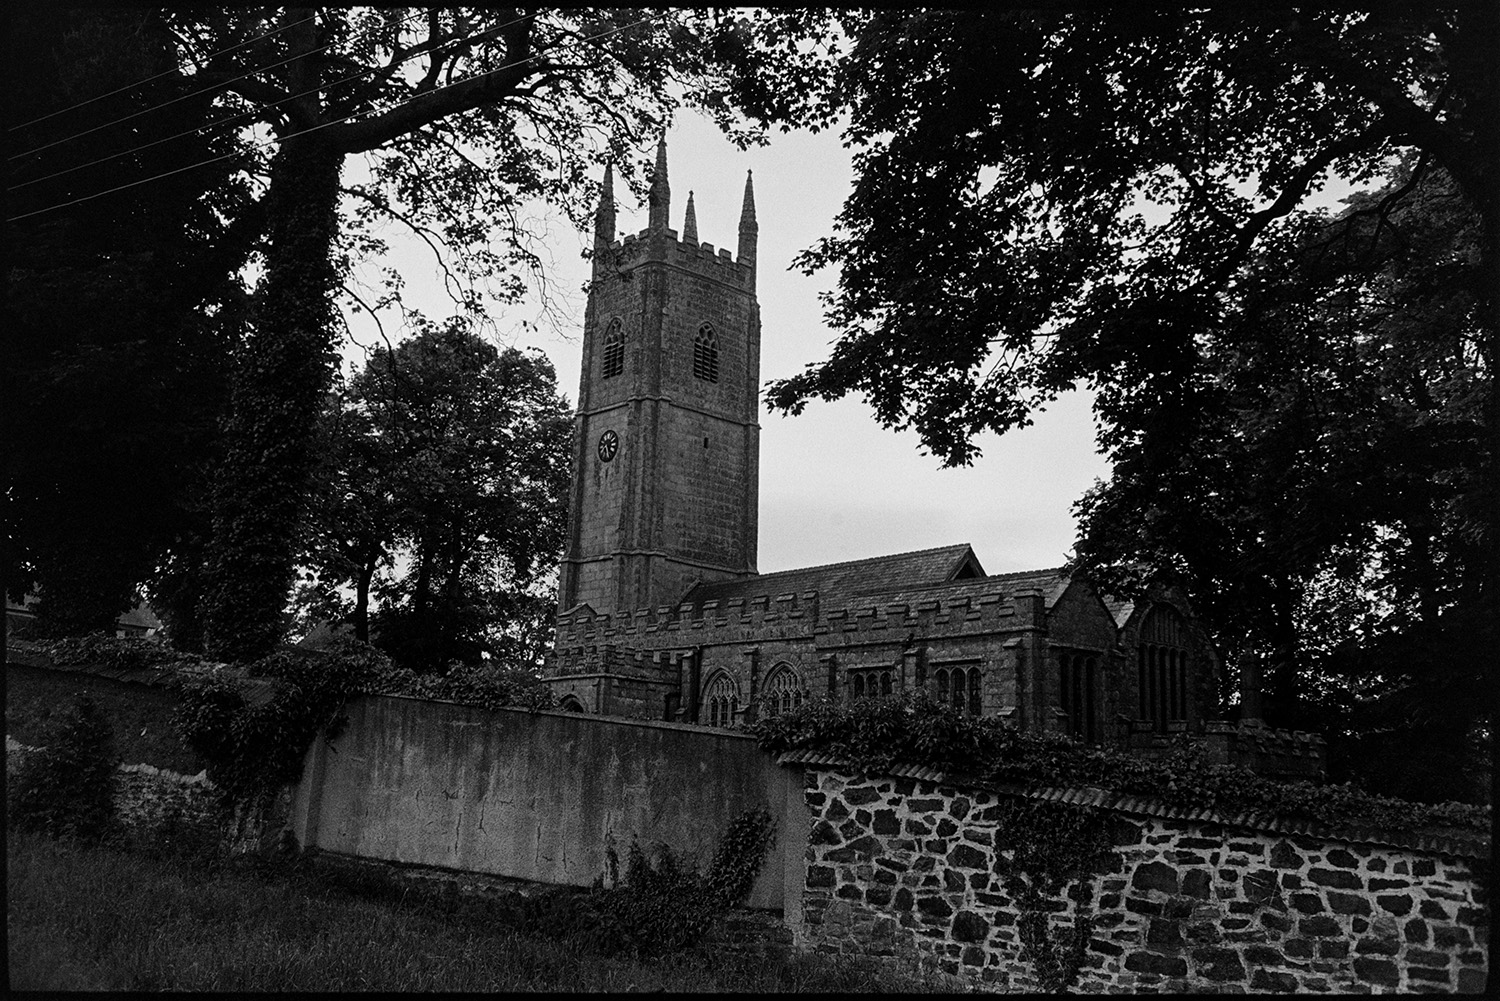 View of church with tower and also church entrance with wooden gate.
[Sampford Courtenay Church tower showing the church clock. A stone wall with tiles and trees surround the church.]